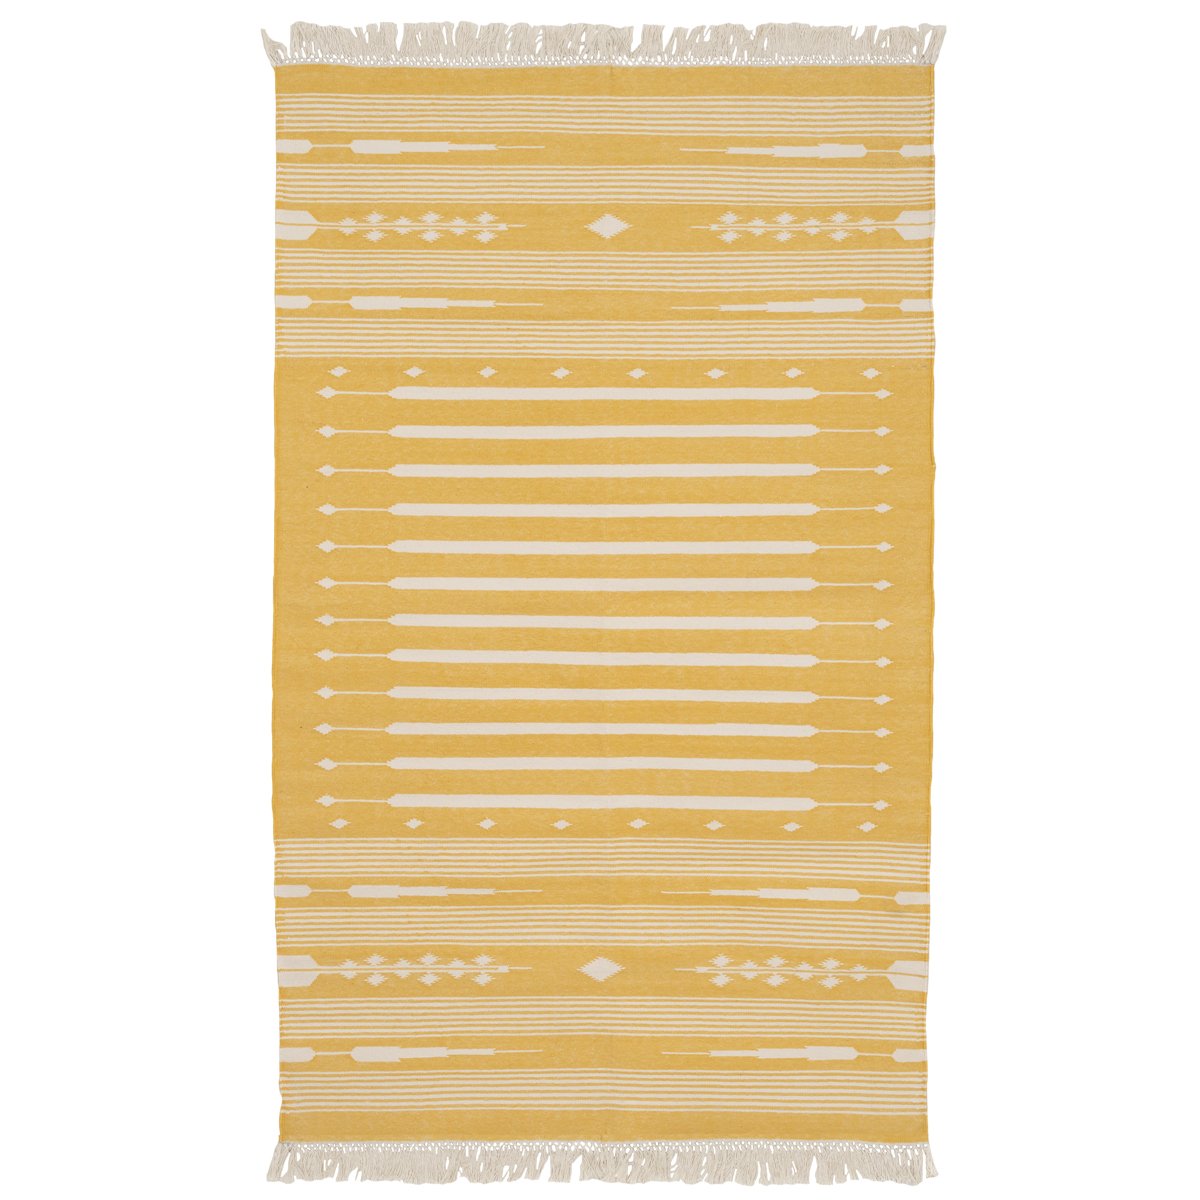 Yellow Striped Handwoven Cotton Rug